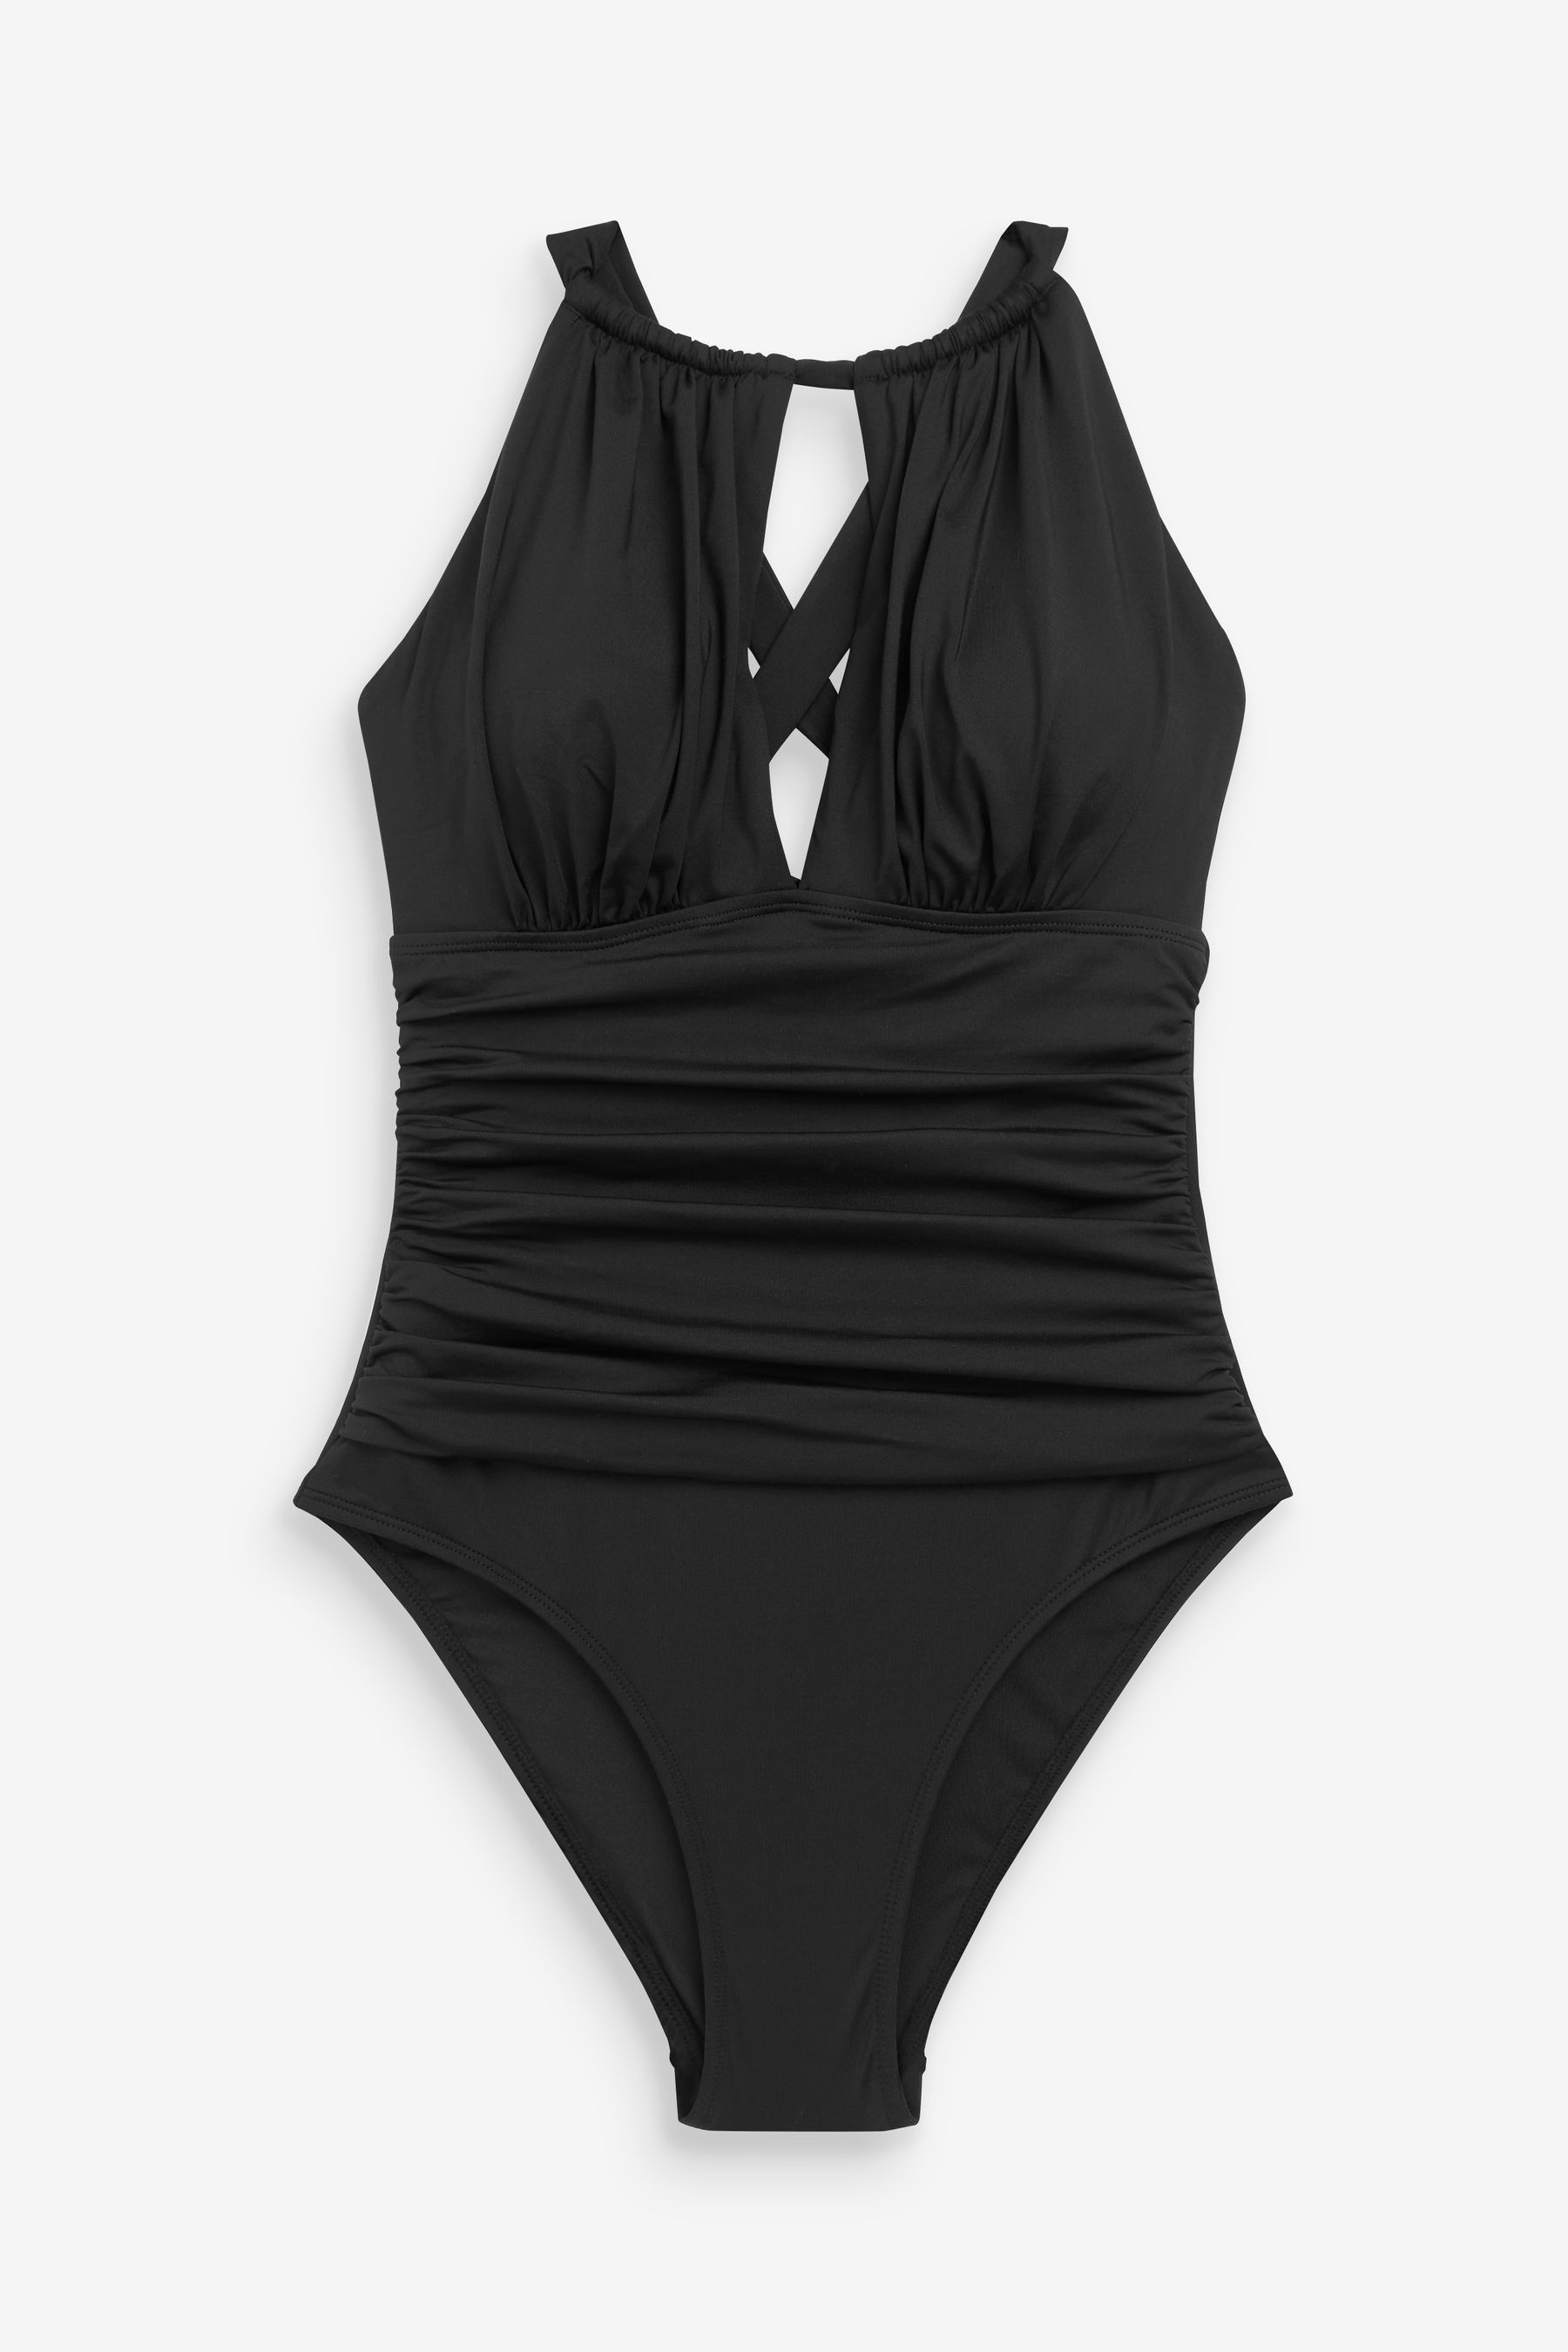 Buy Black High Neck Keyhole Cut Out Tummy Control Swimsuit from the ...